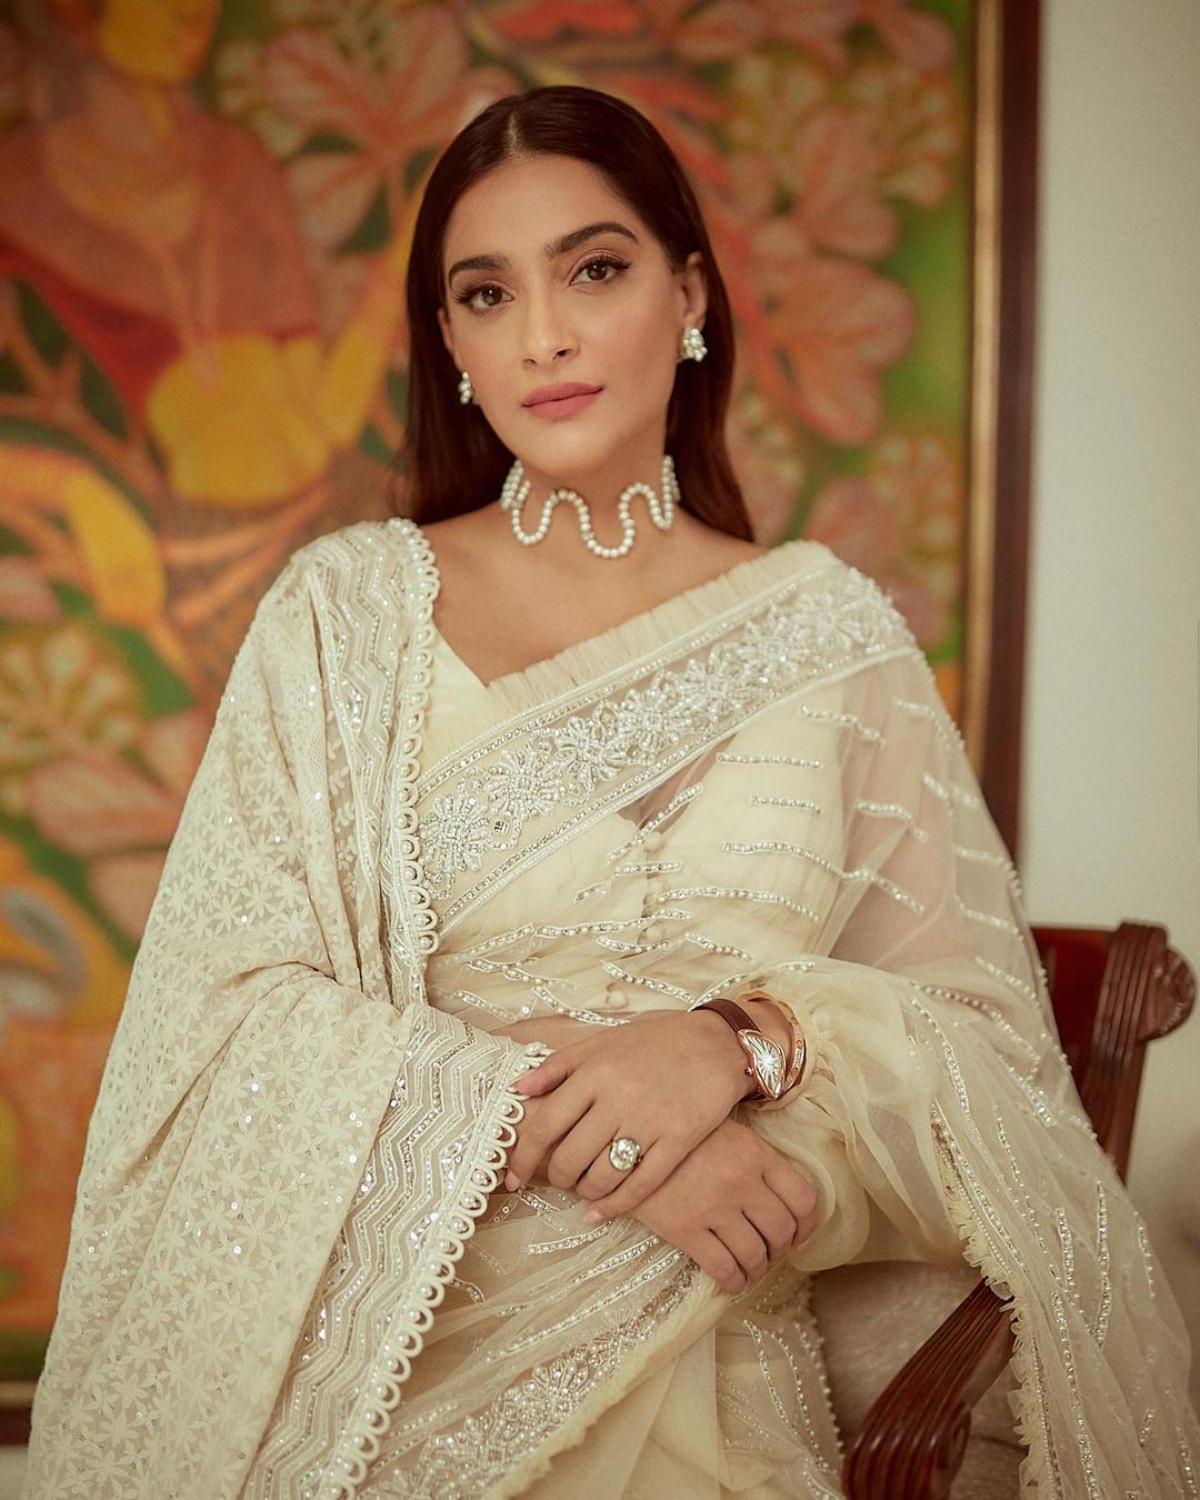 Pearly white: Sonam mesmerised everyone by dressing up in a pearl white sari with beautiful silver embroidery. She paired it with a white dupatta that had intricate white resham embroidery on one shoulder.